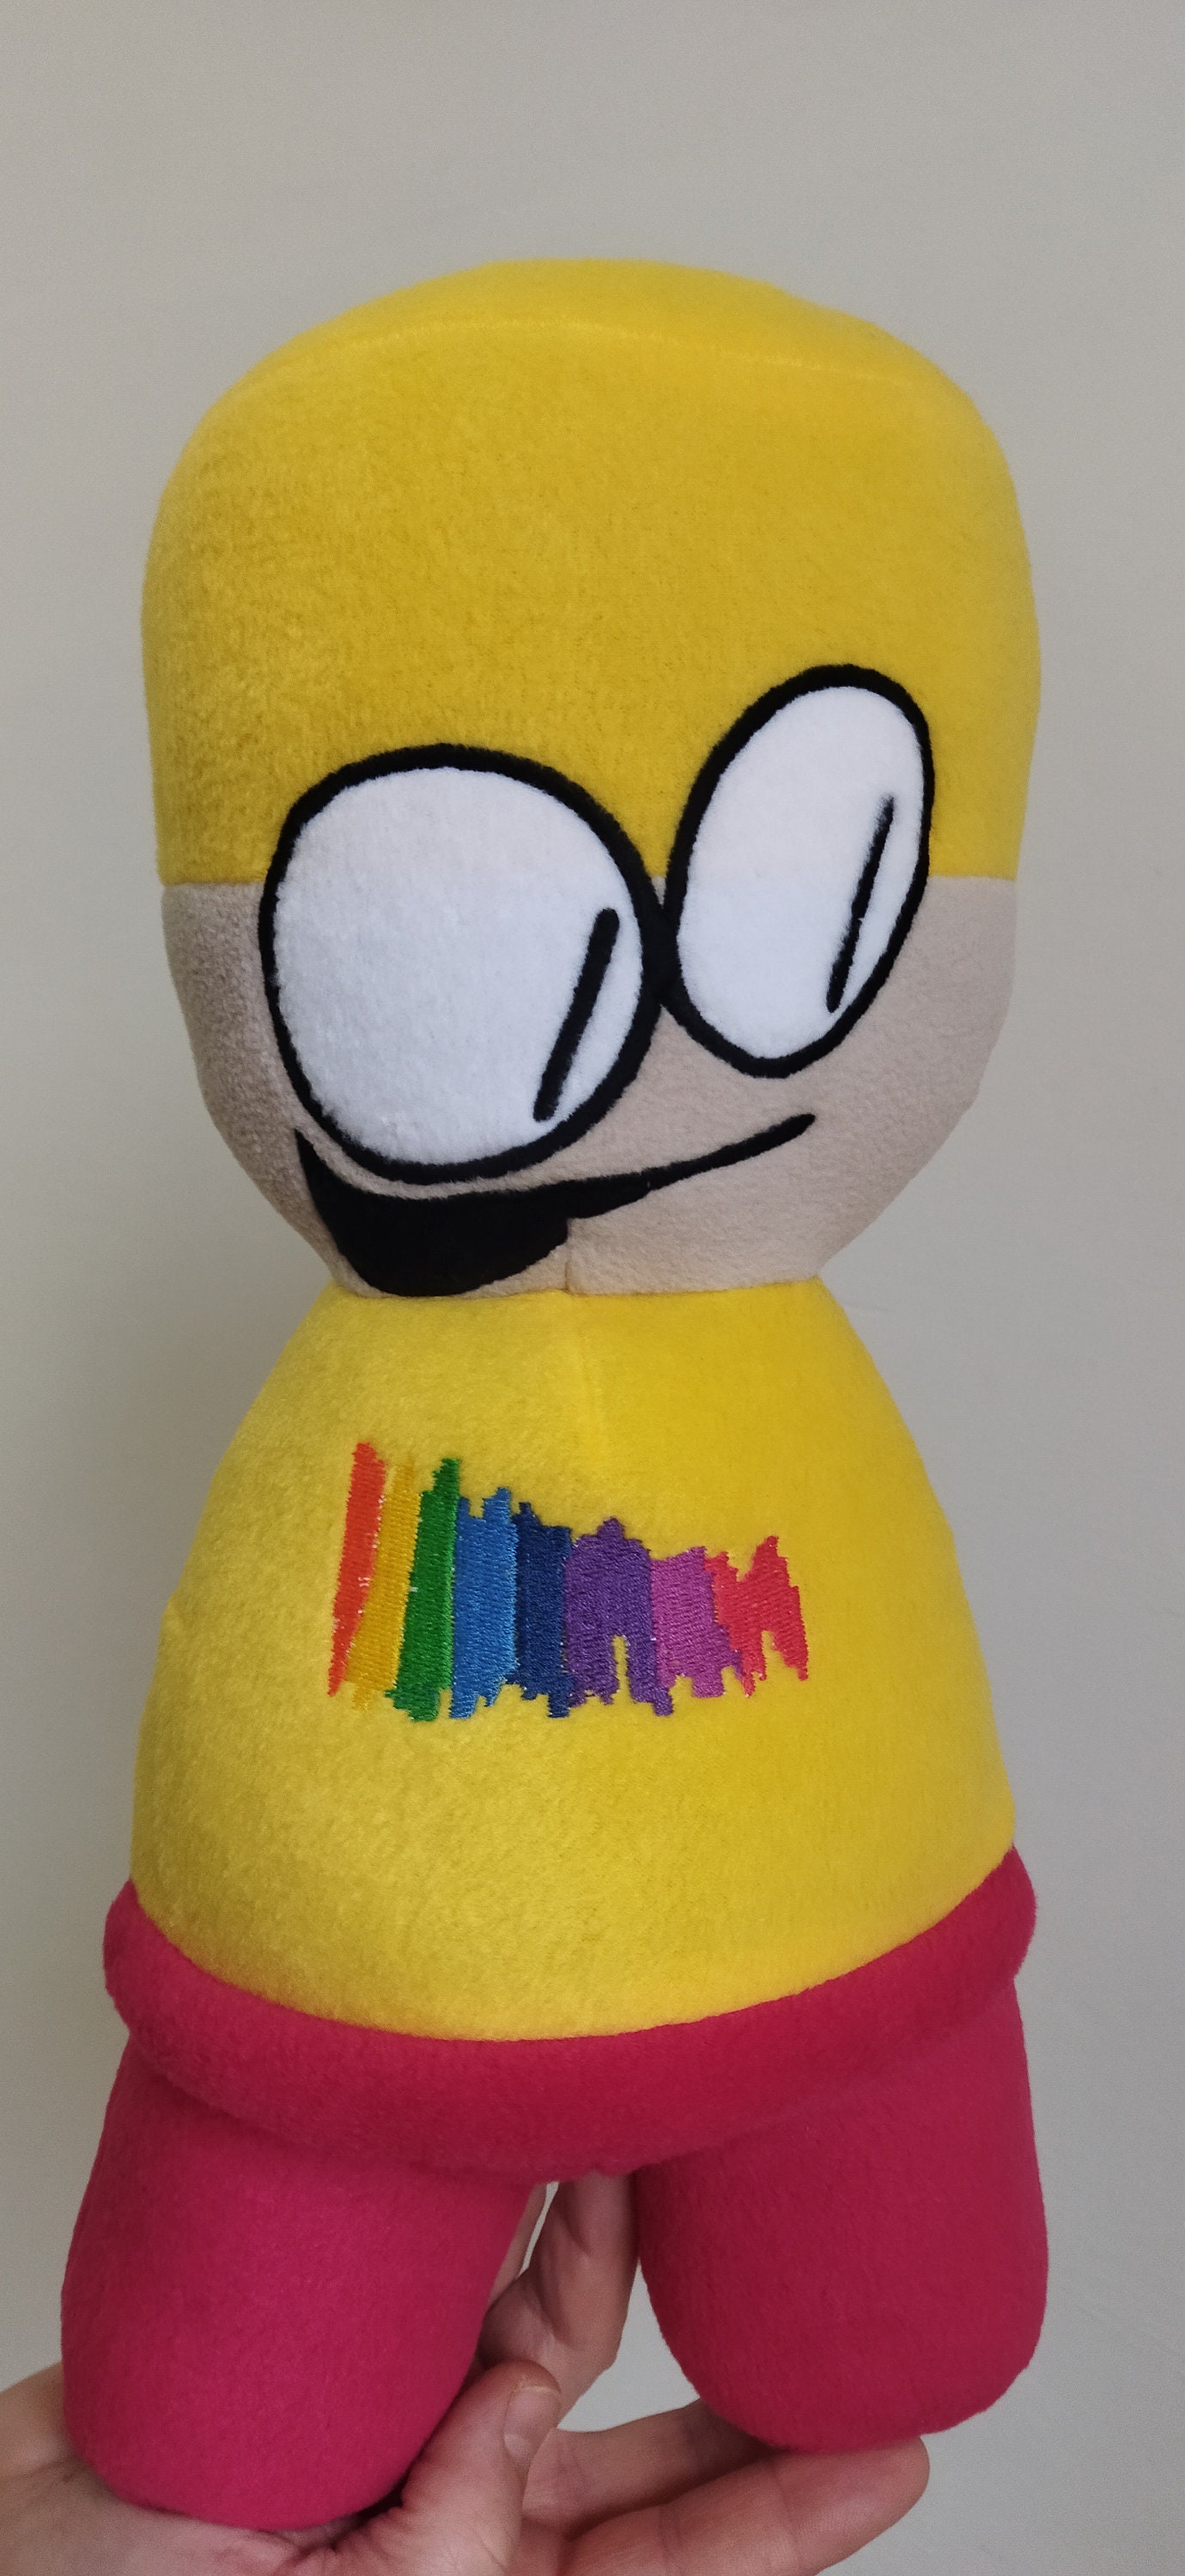 Sunky. FNF. Friday Night Funkin. Large Plush Toy. Size 12 Inch 32 Cm 